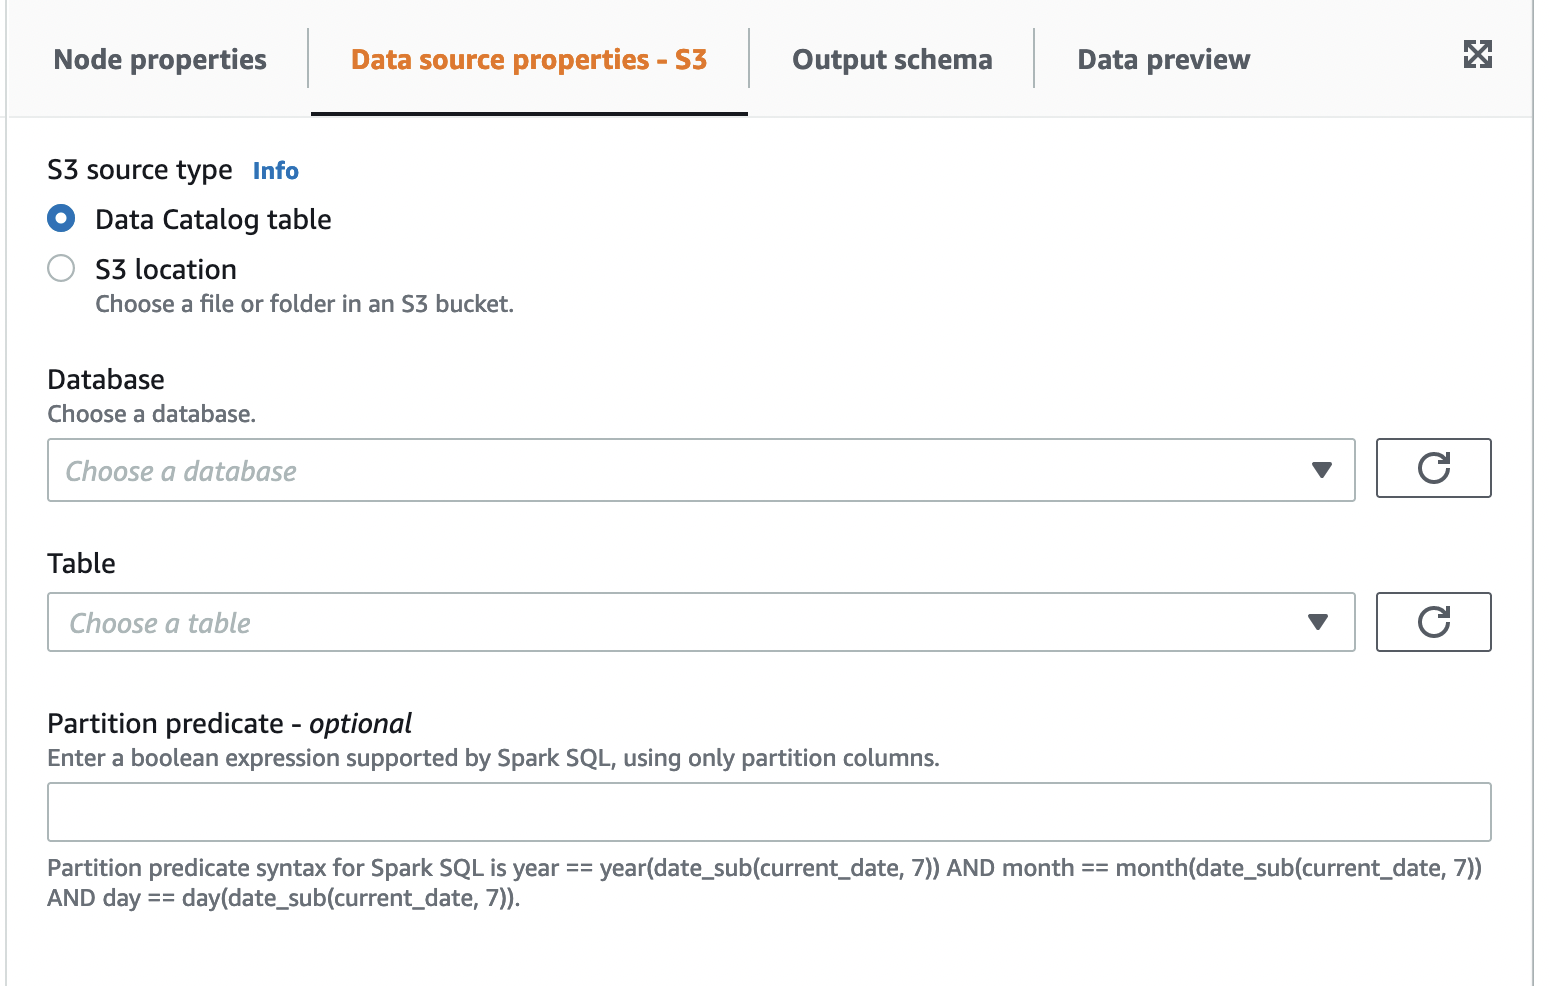 
              The screenshot shows the Data source properties - Amazon S3 tab and fields.
            